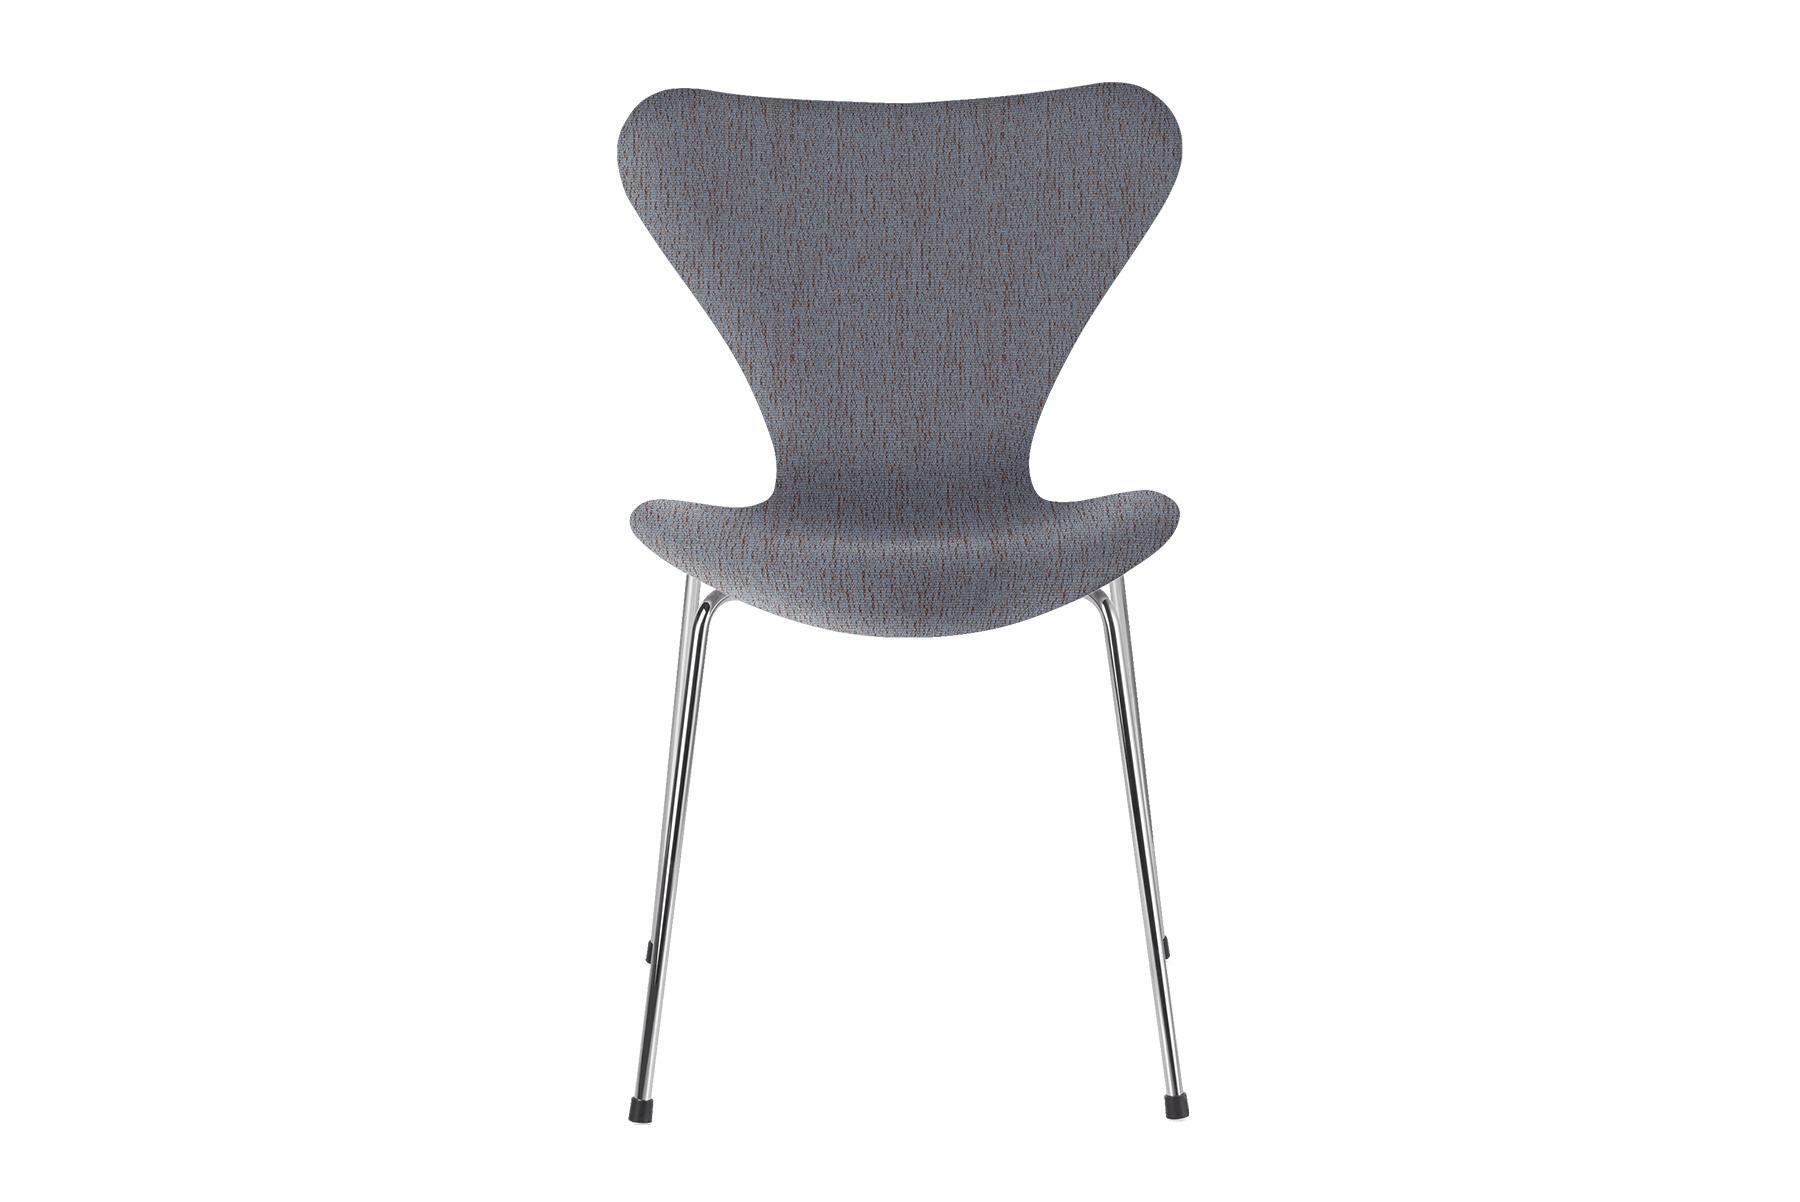 The four-legged stackable chair represents the culmination of the lamination technique. The visionary Arne Jacobsen exploited the possibilities of lamination to perfection resulting in the iconic shape of the chair. Series 7 represents the chair in